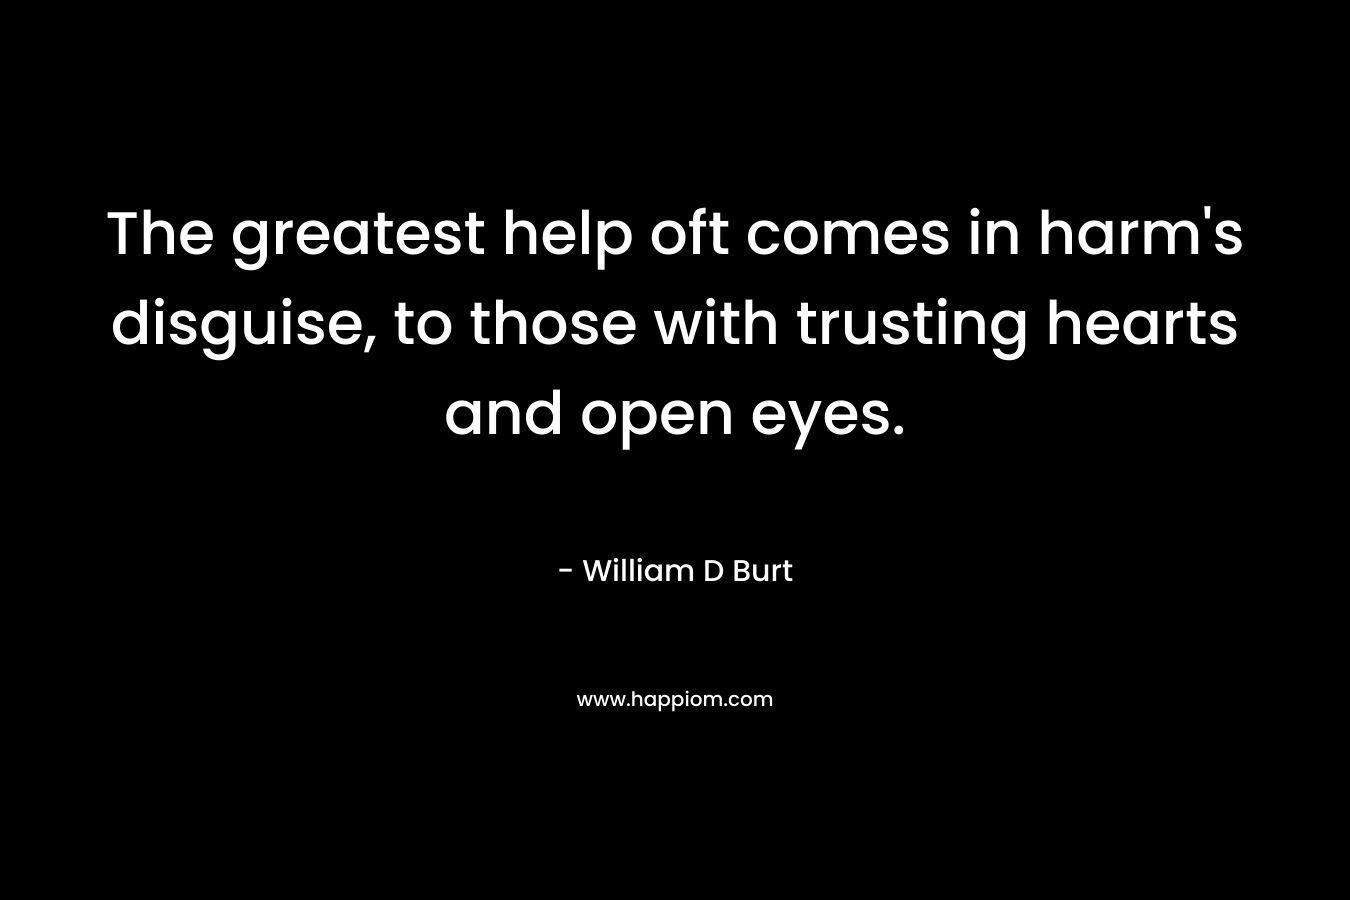 The greatest help oft comes in harm’s disguise, to those with trusting hearts and open eyes. – William D Burt